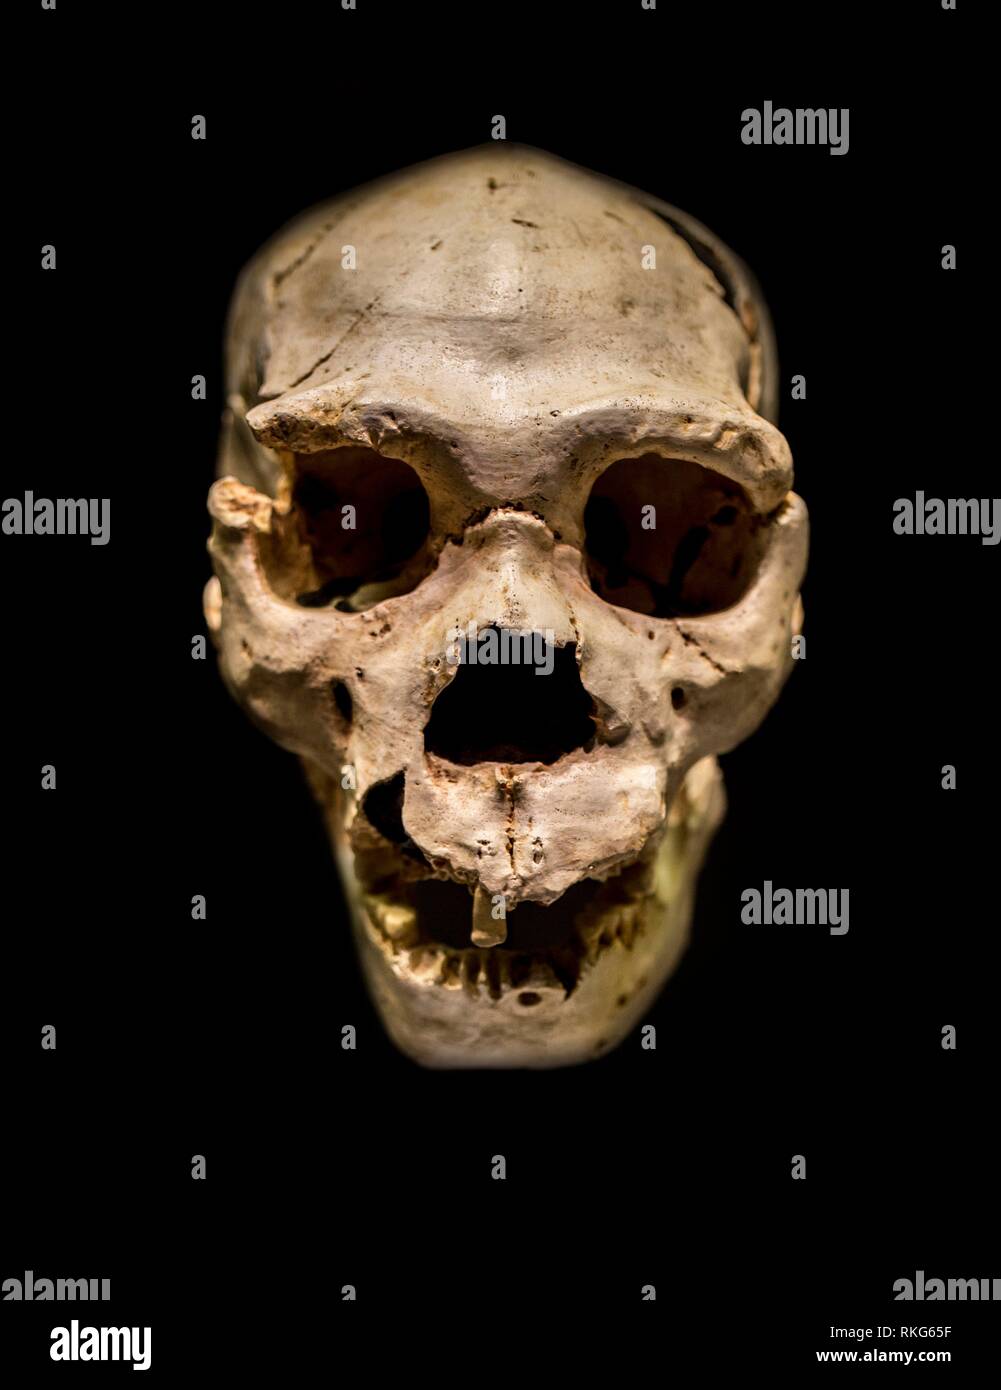 Miguelon, nickname for the most complete skull of an Homo heidelbergensis ever found. Found at Atapuerta Sima de los Huesos, Burgos, Spain. Stock Photo